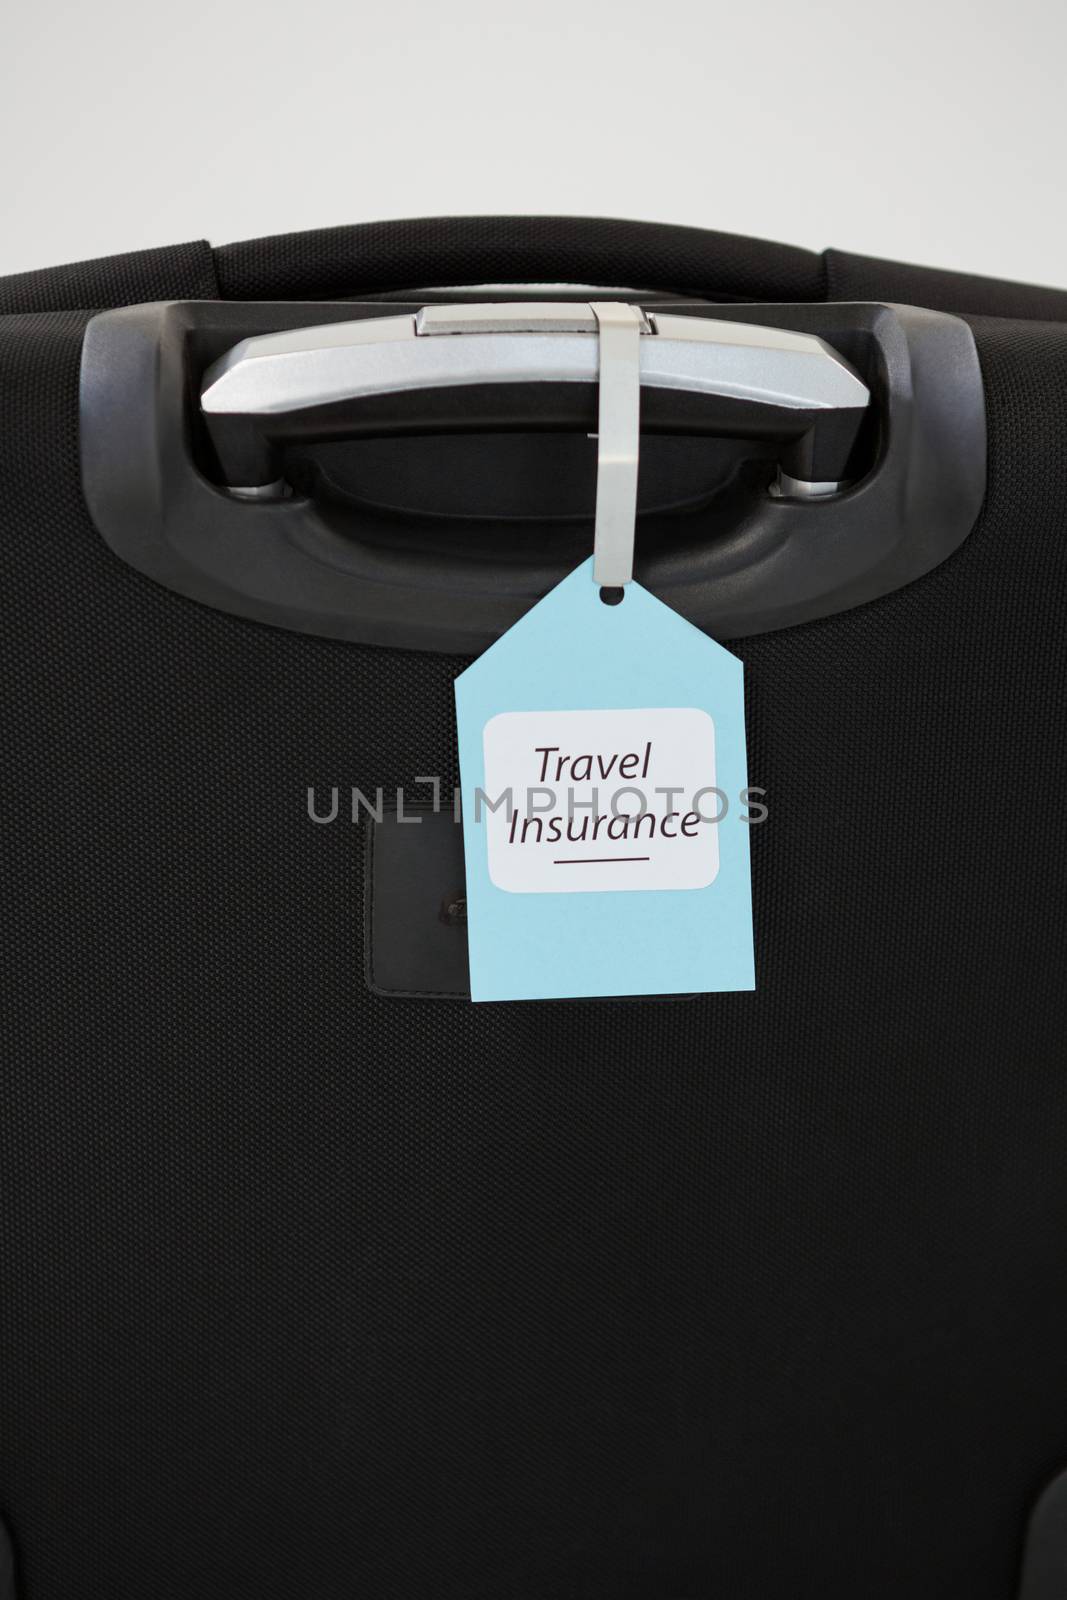 Travel insurance label tied to a suitcase by Wavebreakmedia